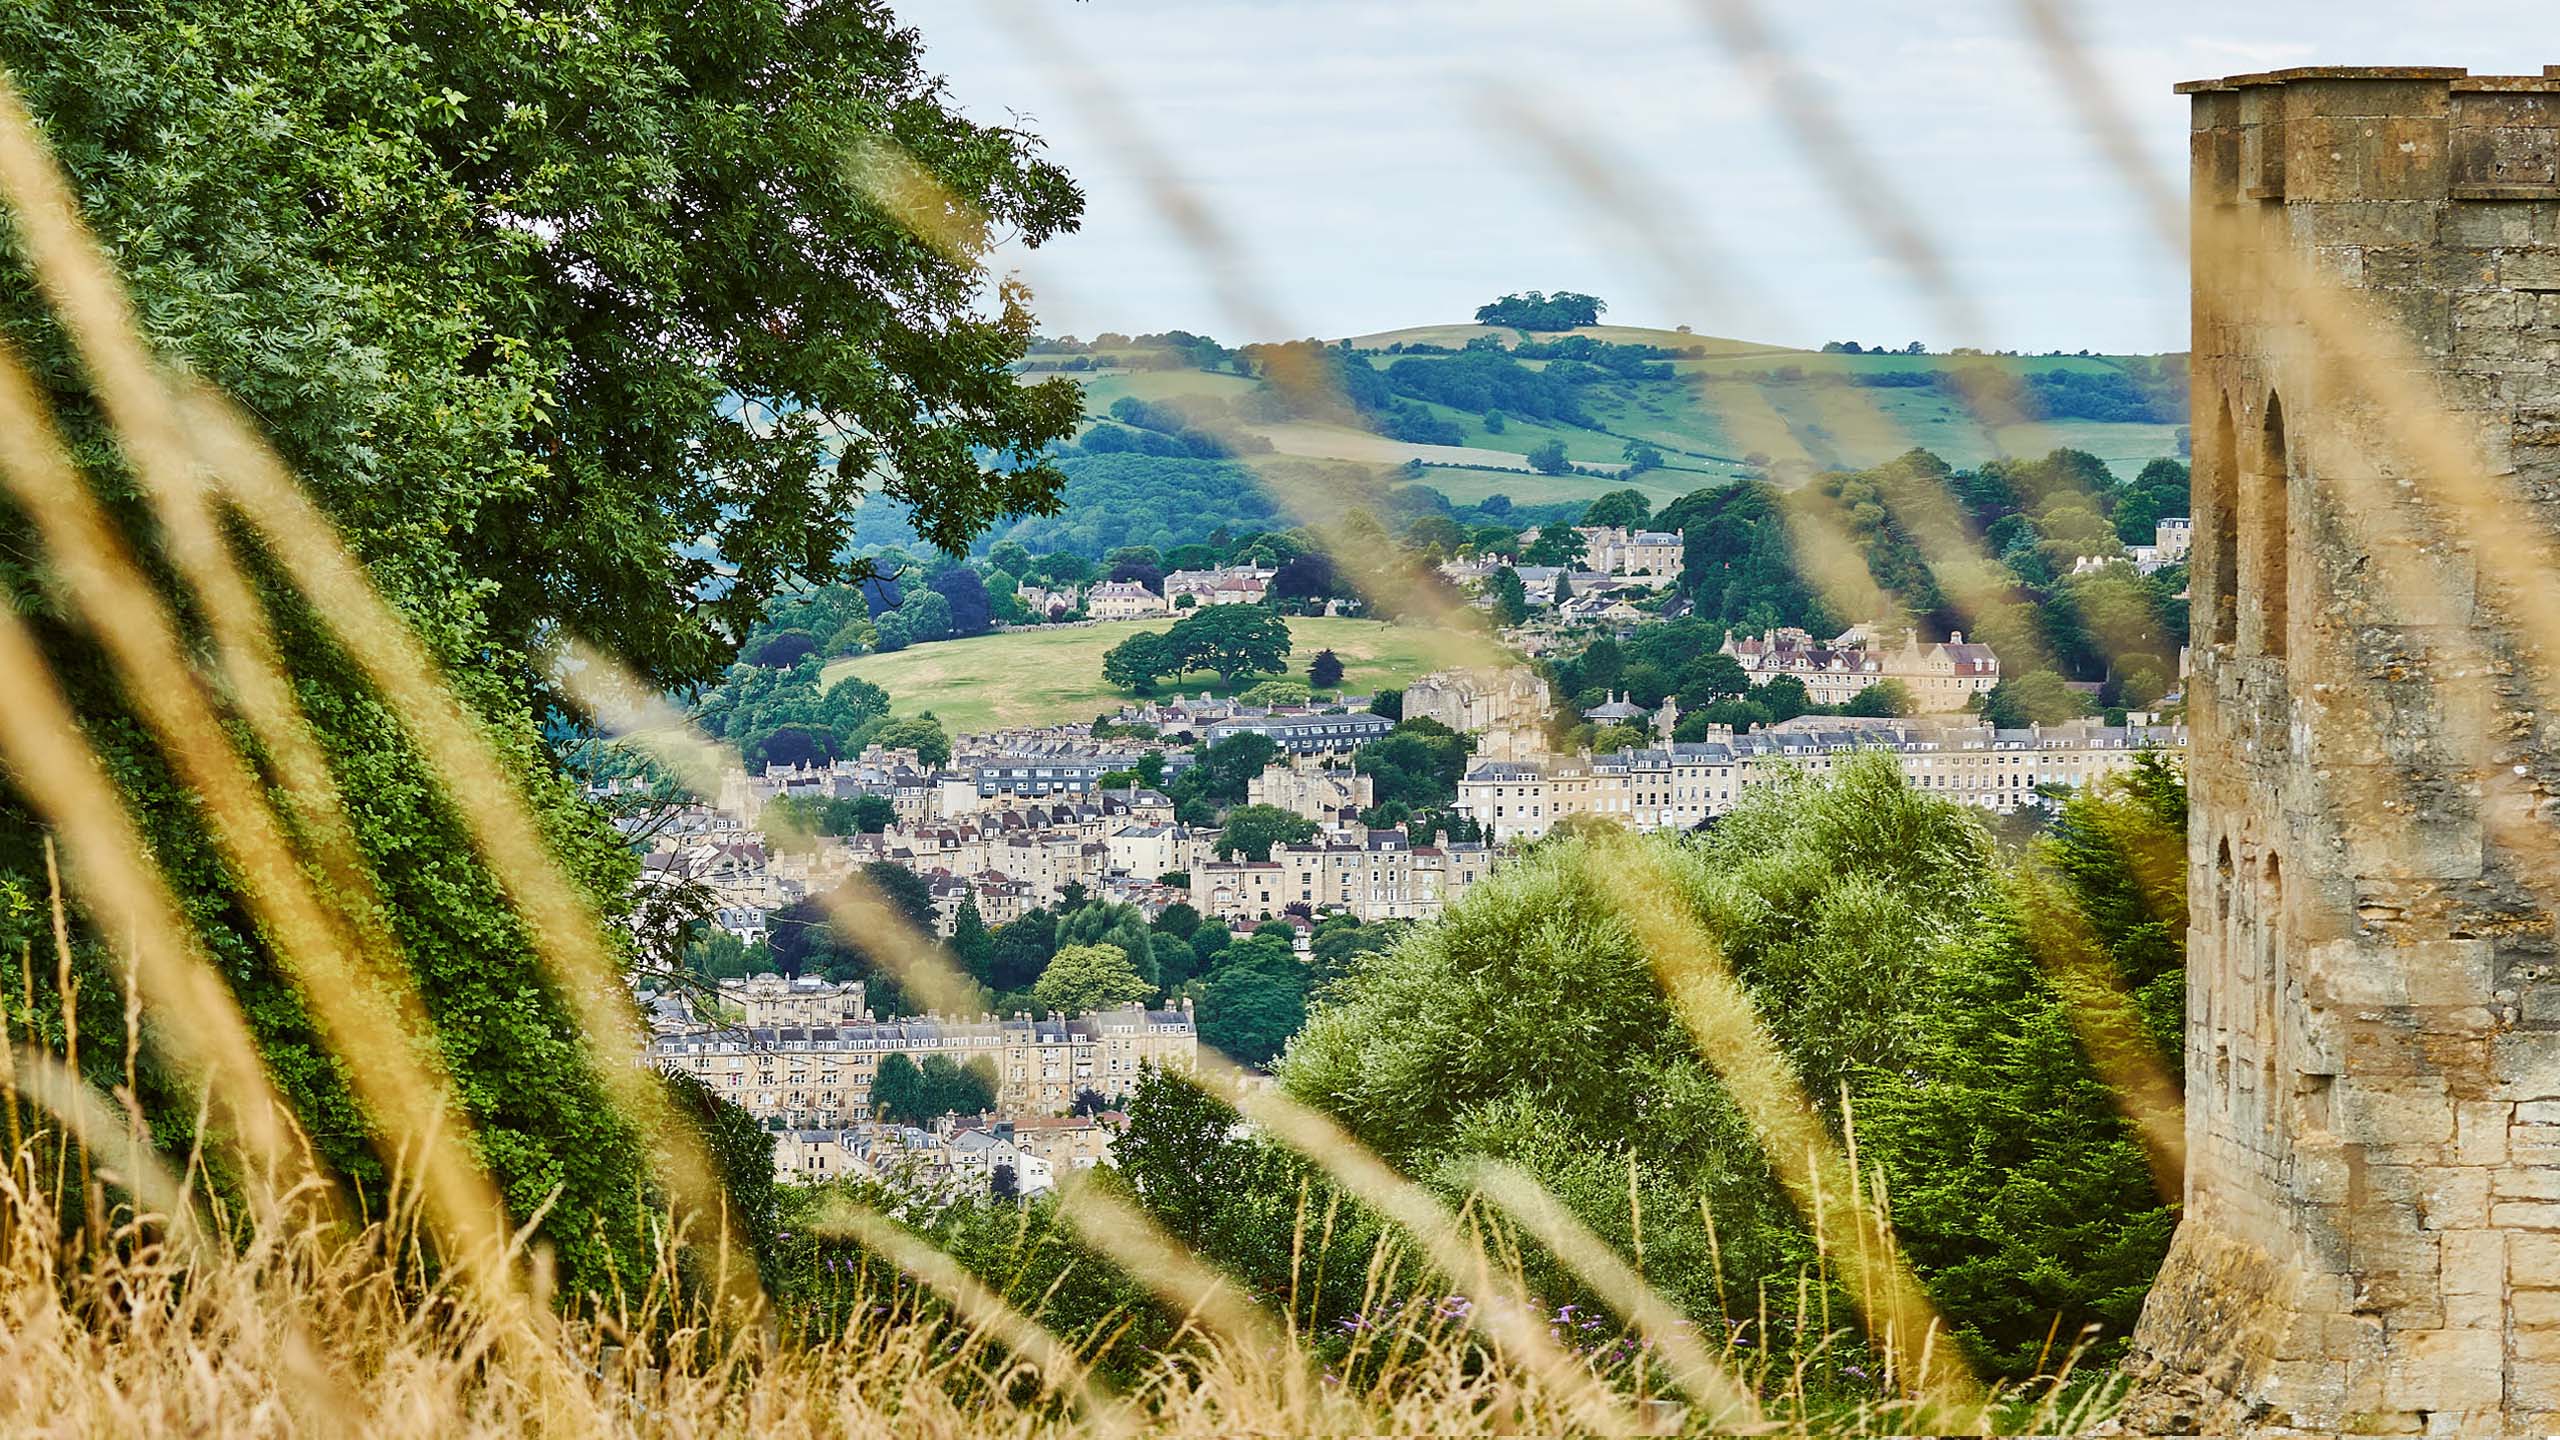 Peephole view of the city of Bath. The city, in the background, is framed by trees and shrubs on the left and Sham castle on the right. There are  rolling hills in the distant background and a very light-blue sky.